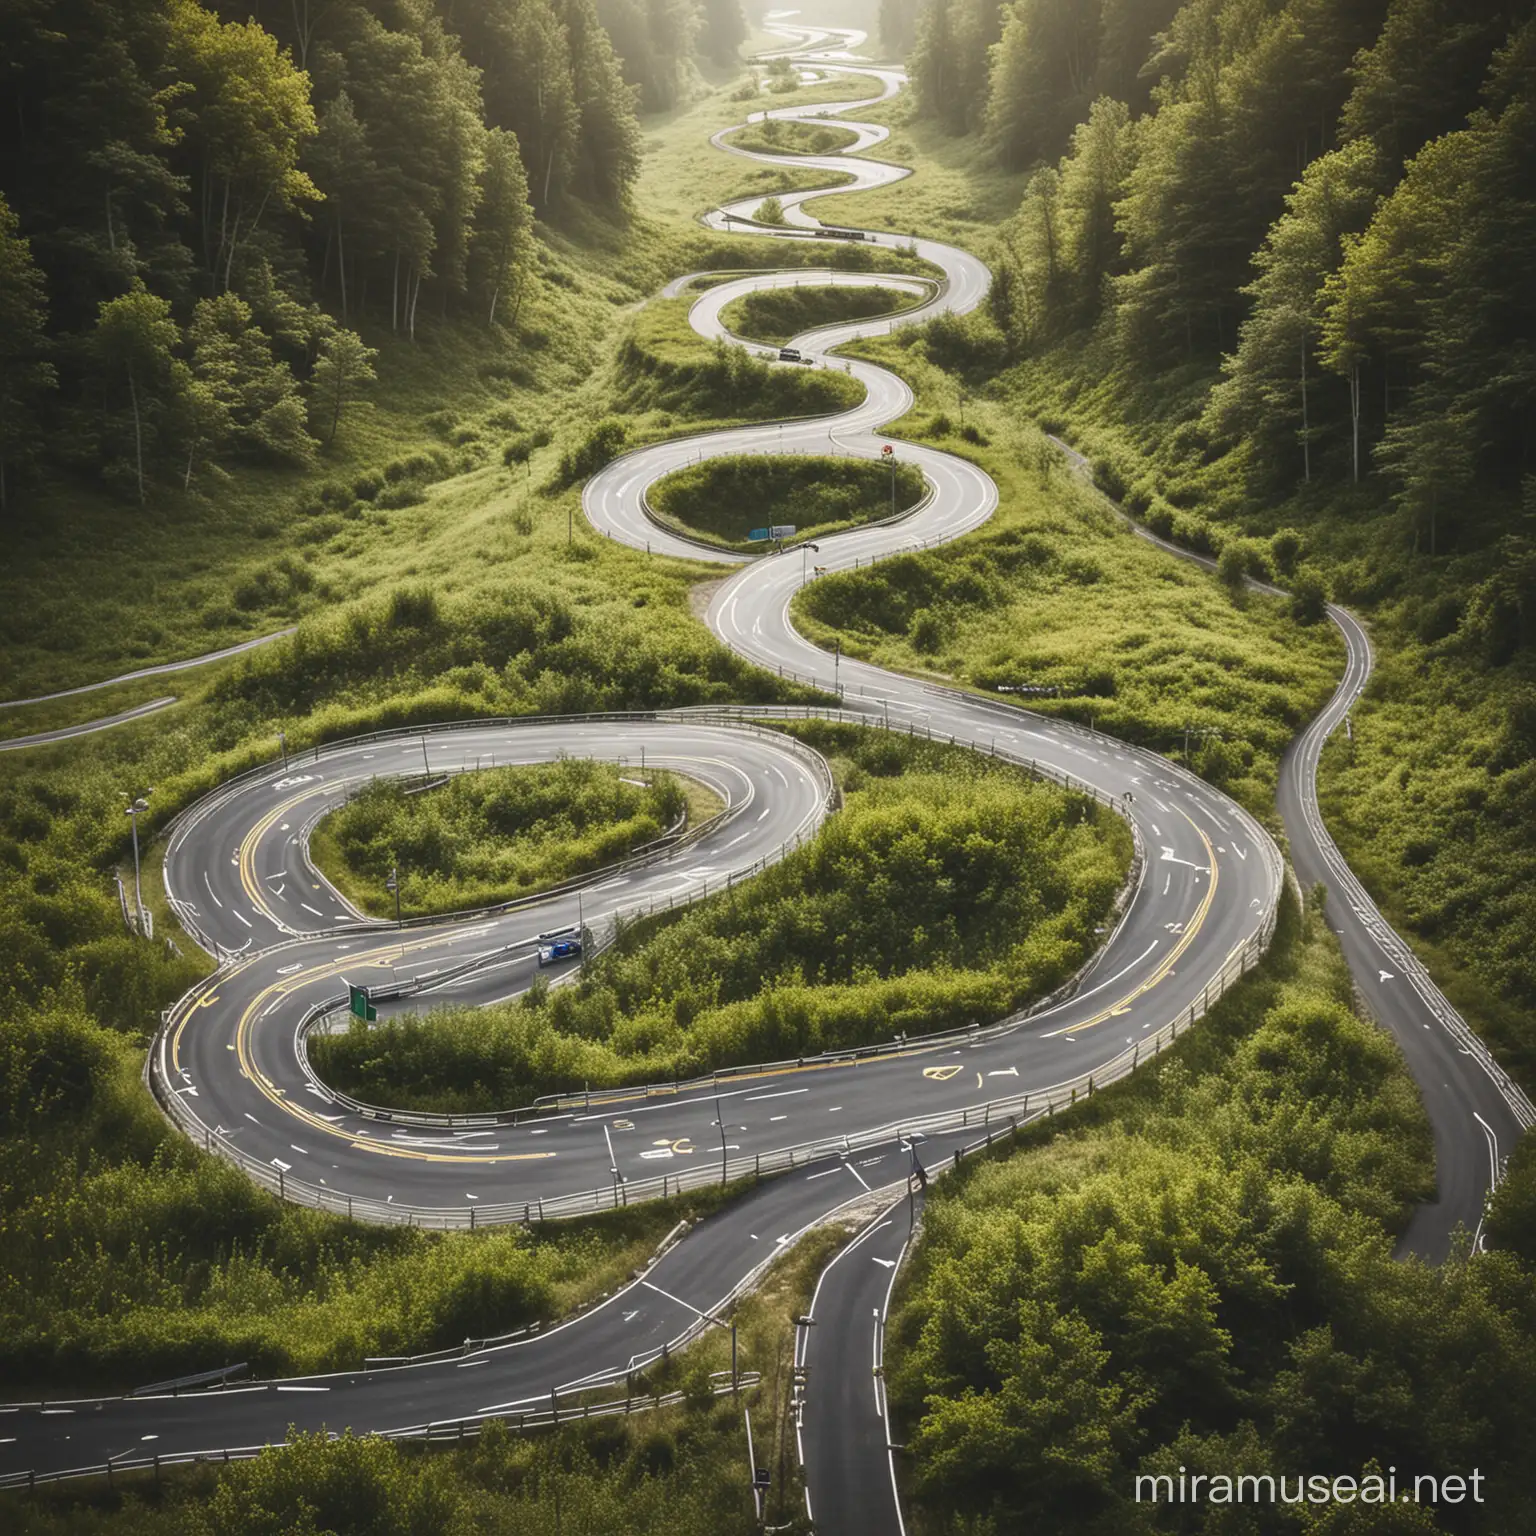  a winding road emerges, symbolizing the path to financial freedom. The road is adorned with signposts, each representing a crucial aspect of money management: saving, investing, budgeting, and strategic planning. This visual metaphor conveys the importance of making informed decisions and setting clear goals on the journey to financial security.